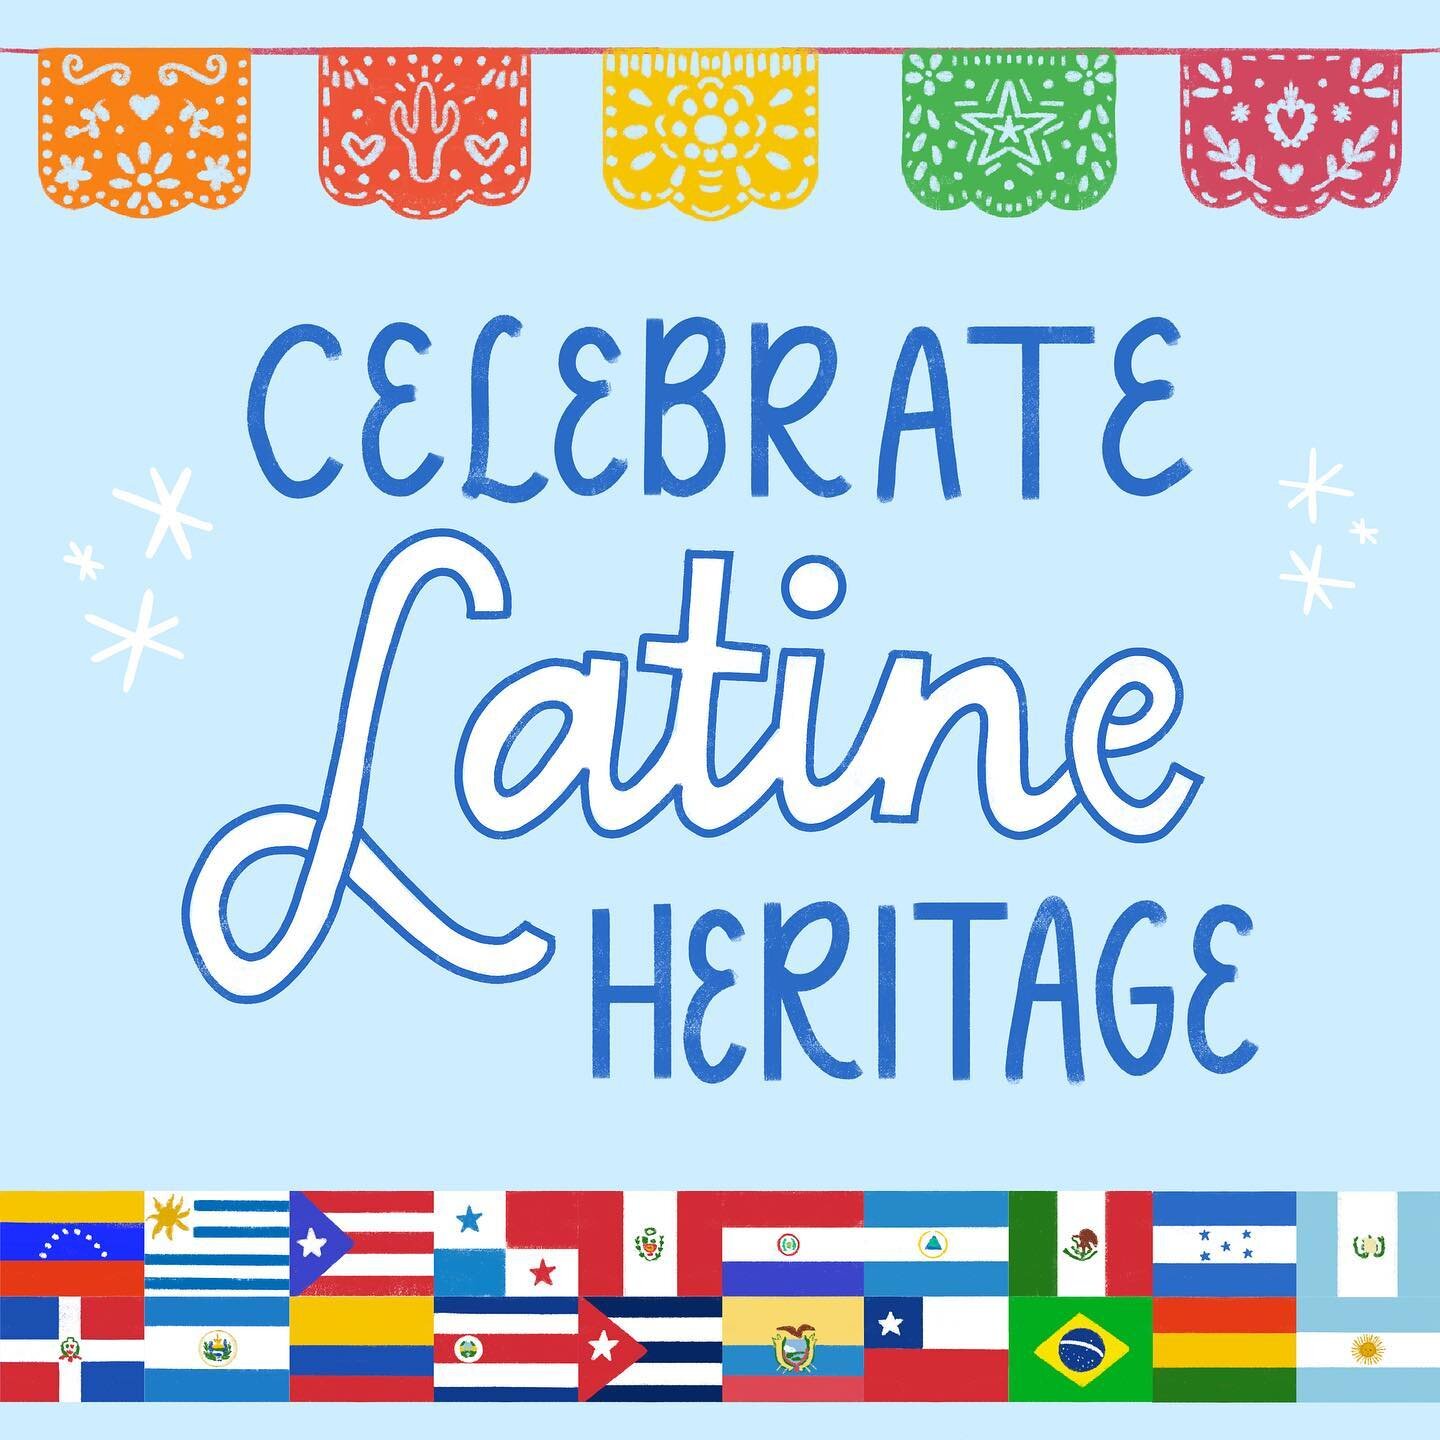 feliz latine heritage month amiguis! 💃🏻

while I feel and celebrate and live my culture 365 days a year, I like to take this month to learn about other latin american countries, their unique flavors, traditions, and cultures ❤️ we all have a vast a